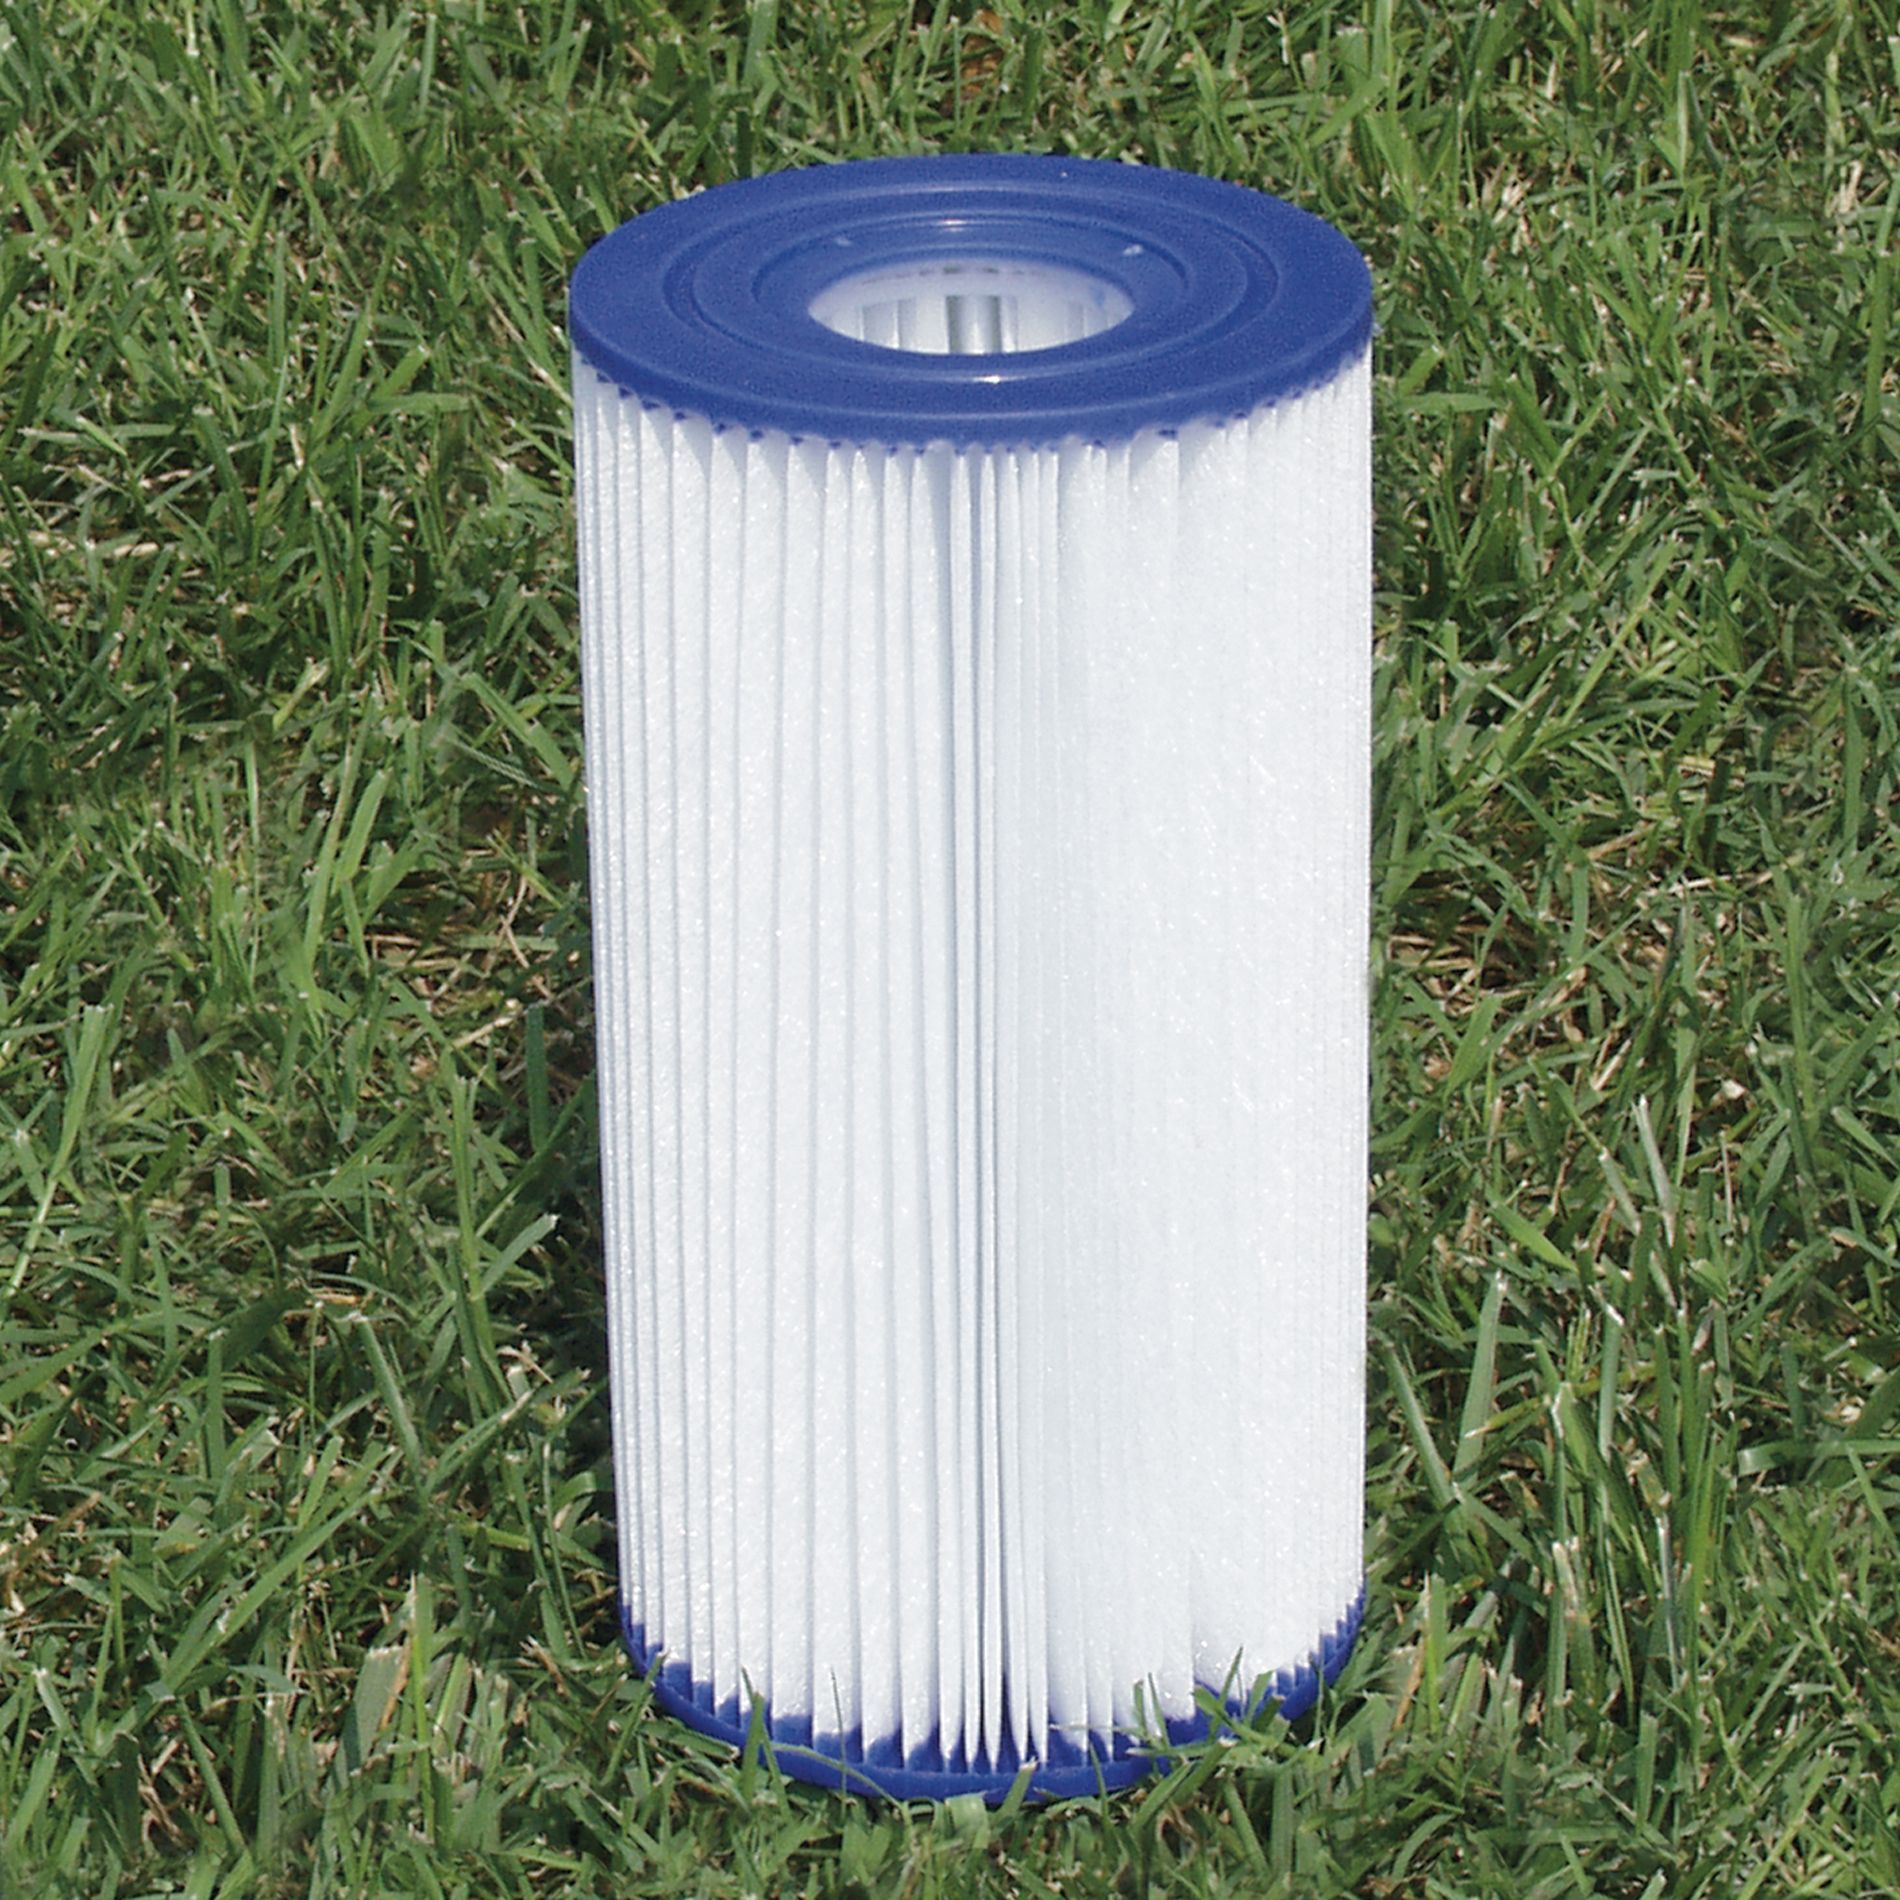 Summer Escapes Single Filter Cartridge Type A/C 4.13" X 8" - Toys